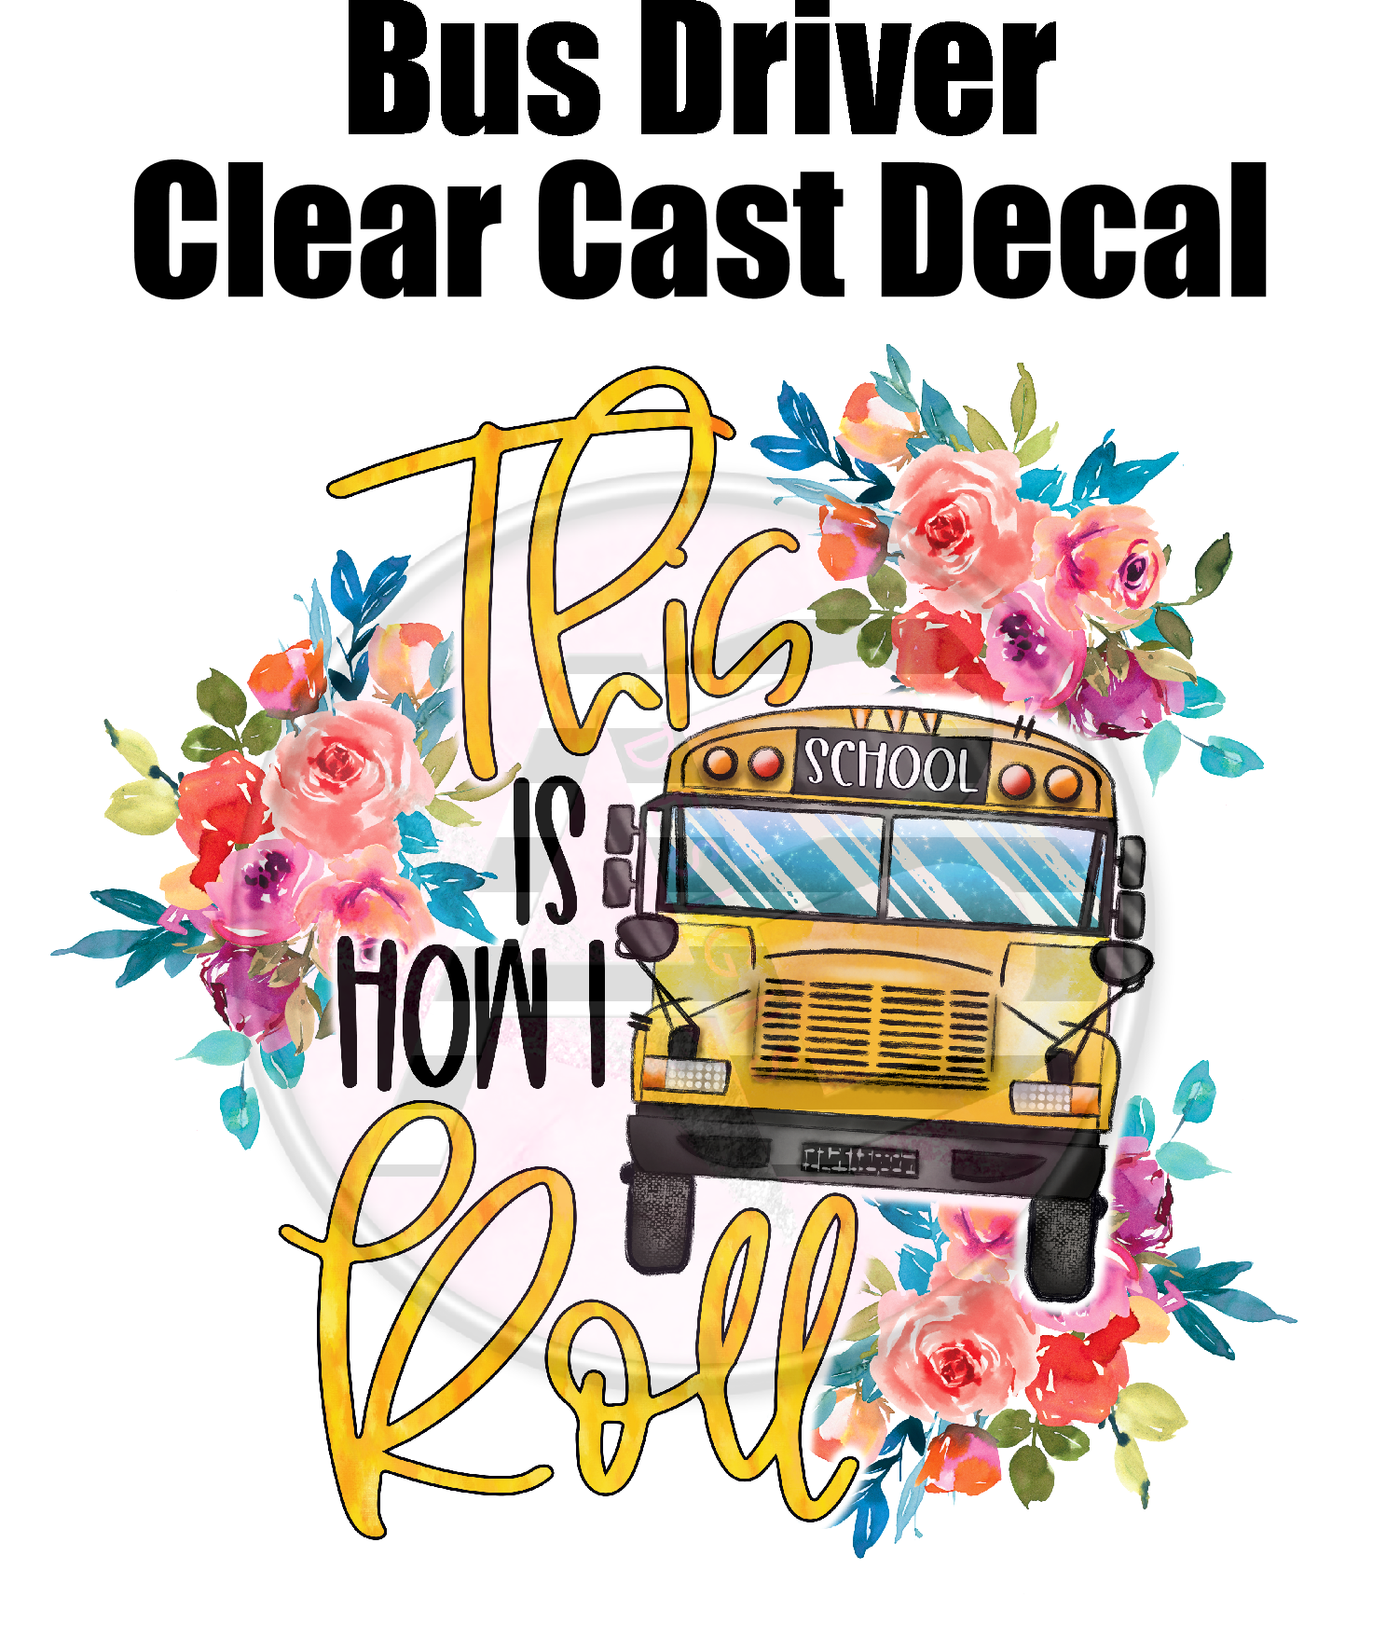 Bus Driver 02 - Clear Cast Decal